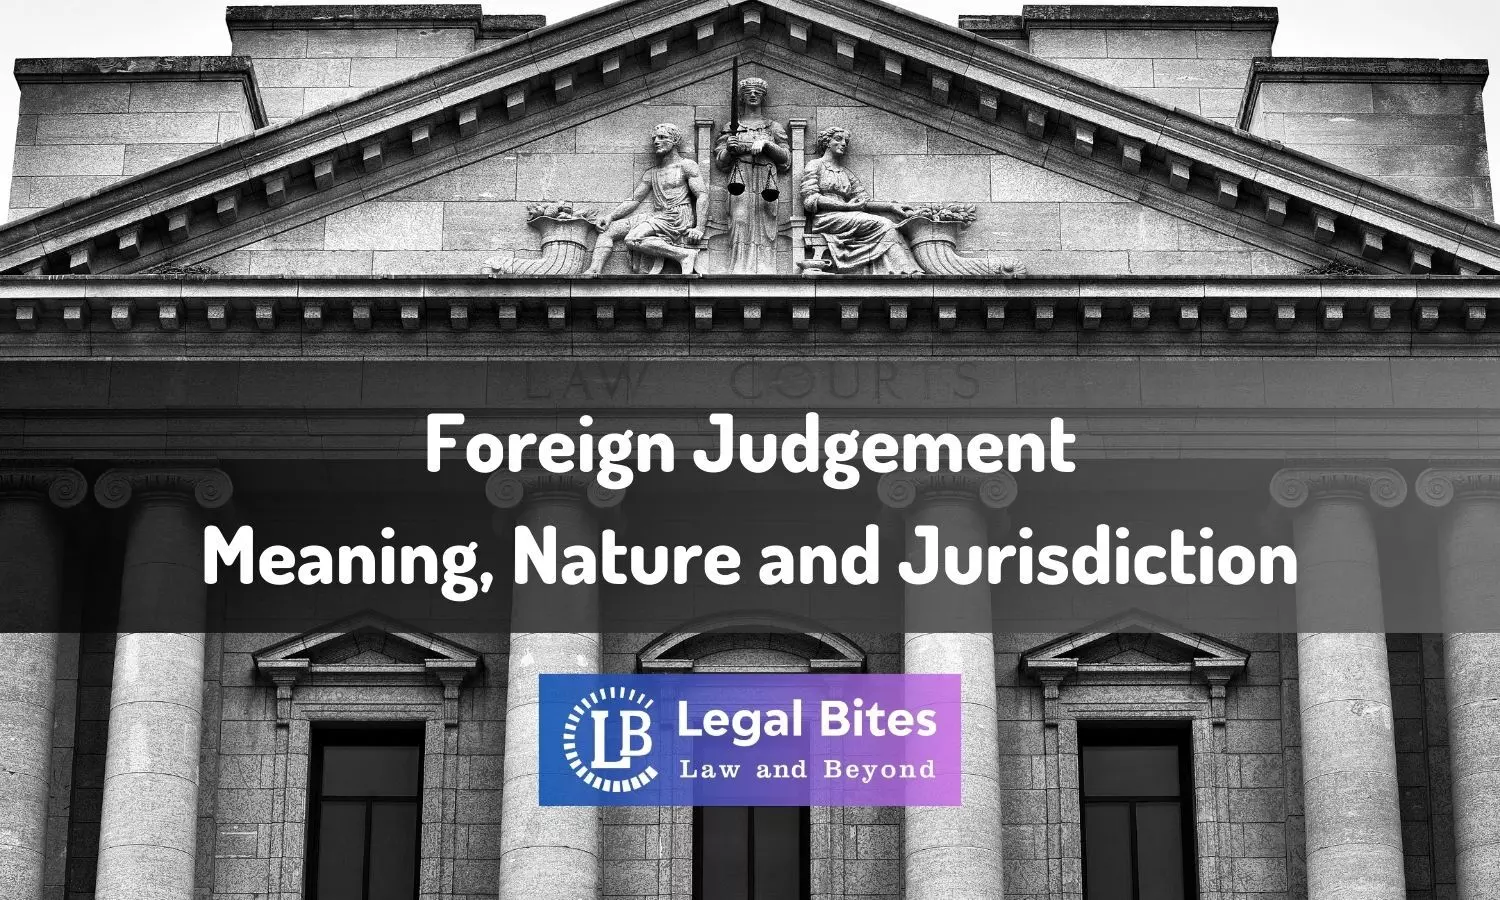 Foreign Judgement - Meaning, Nature and Jurisdiction